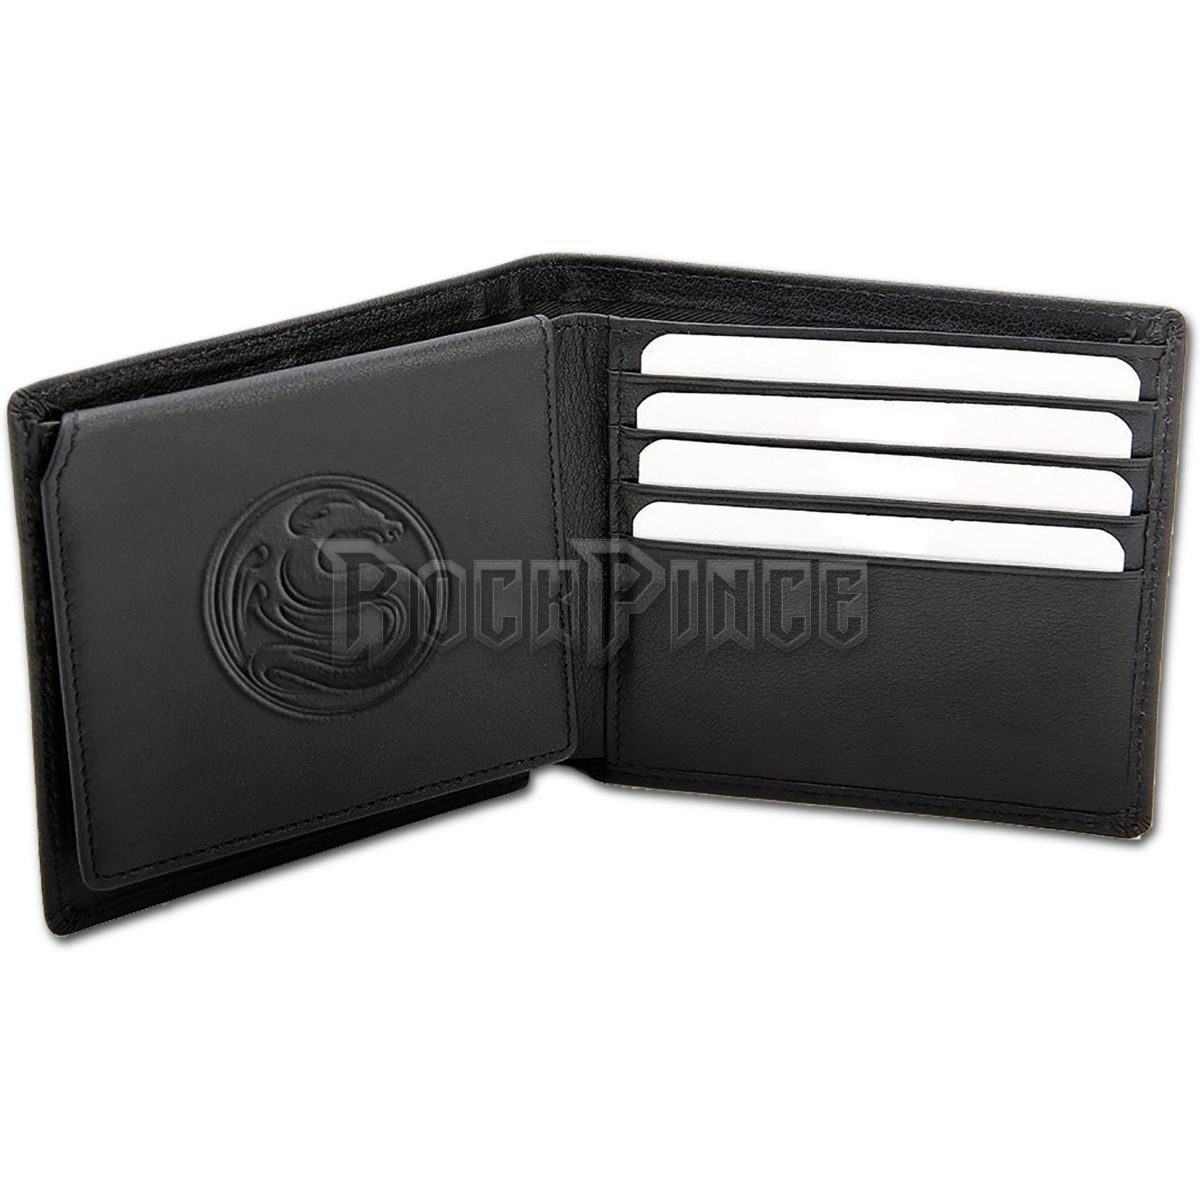 LORD HAVE MERCY - BiFold Wallet with RFID Blocking and Gift Box - T153A309